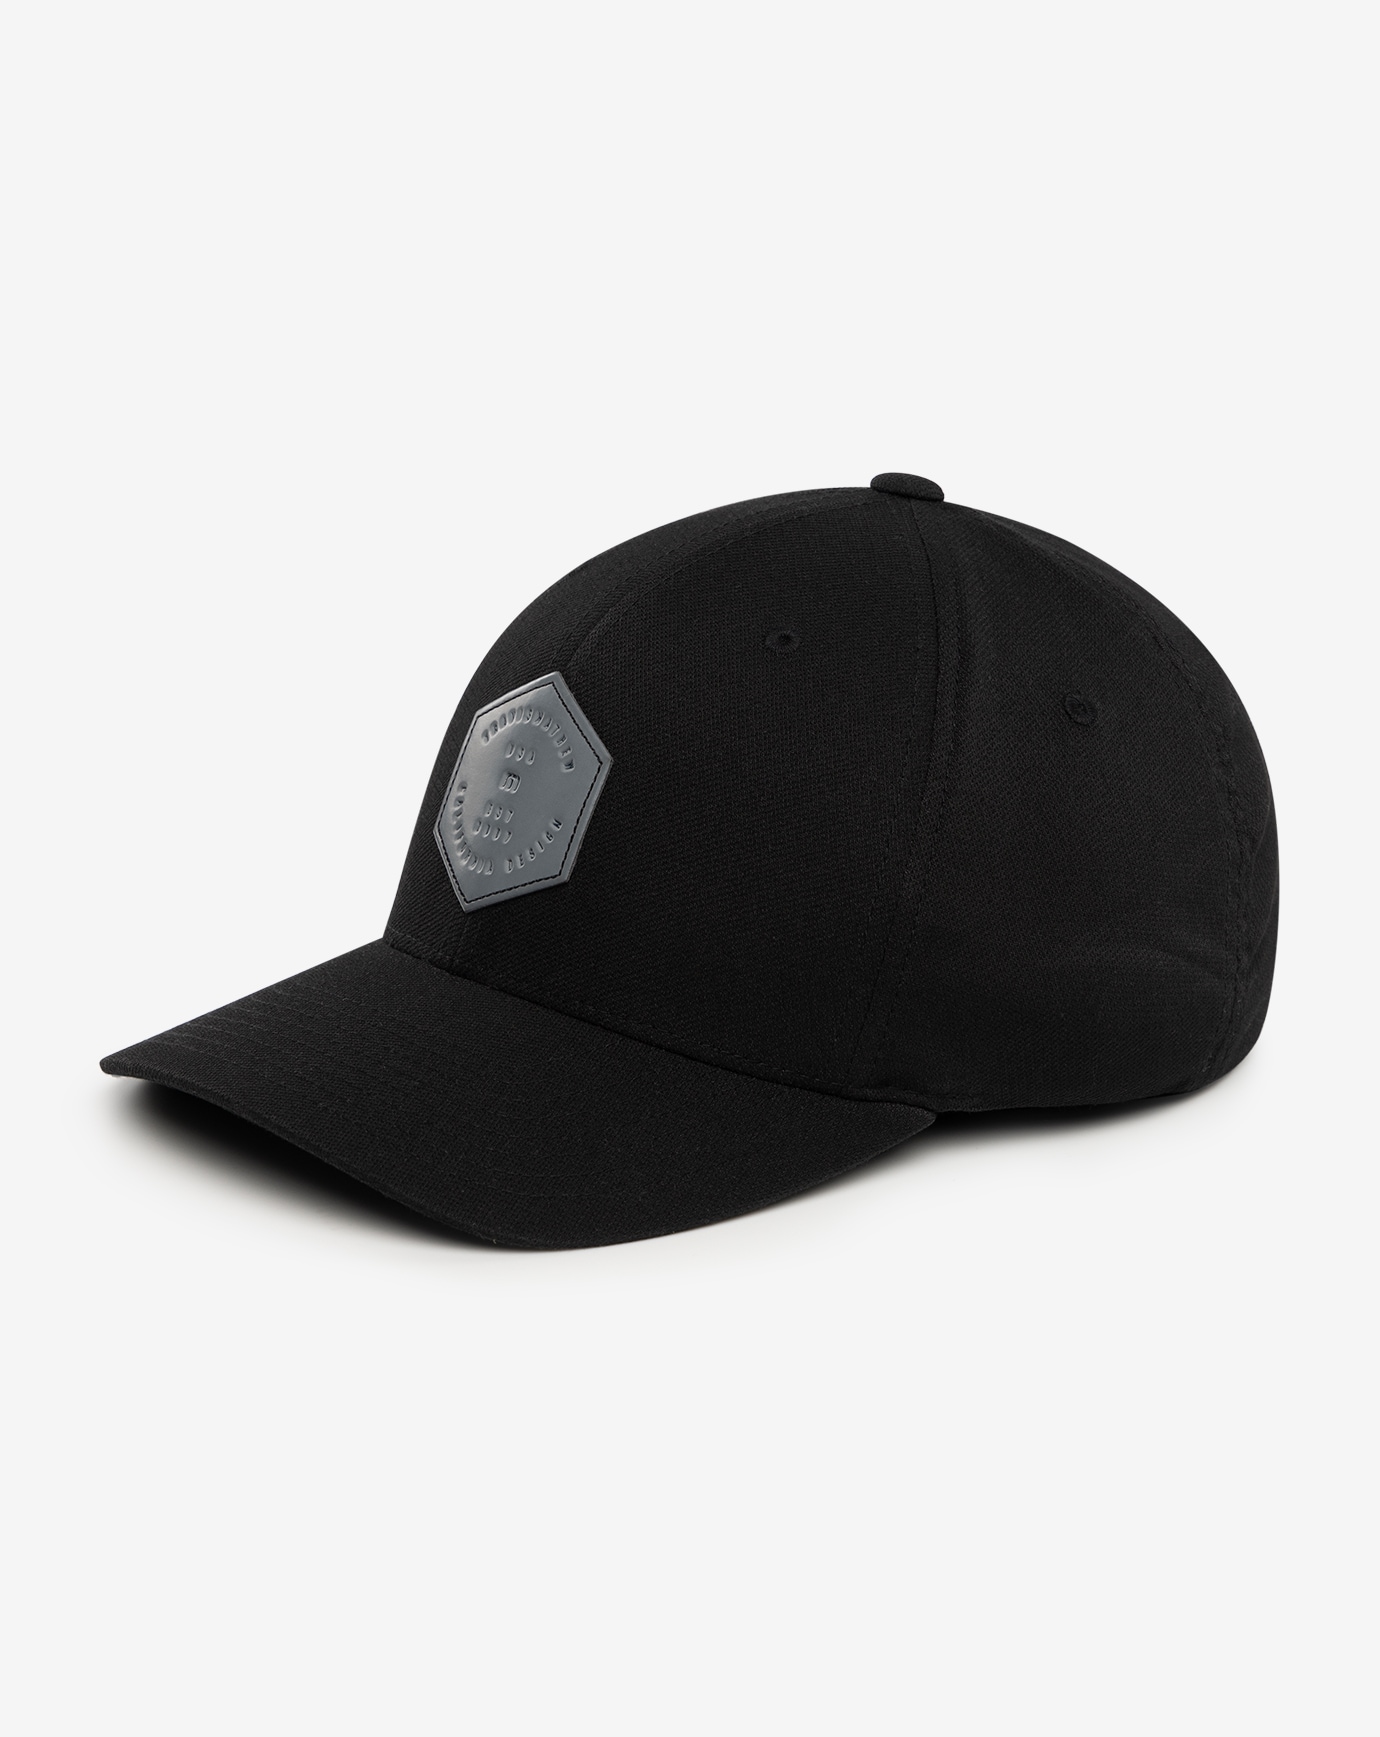 DOPP FITTED HAT Image Thumbnail 2